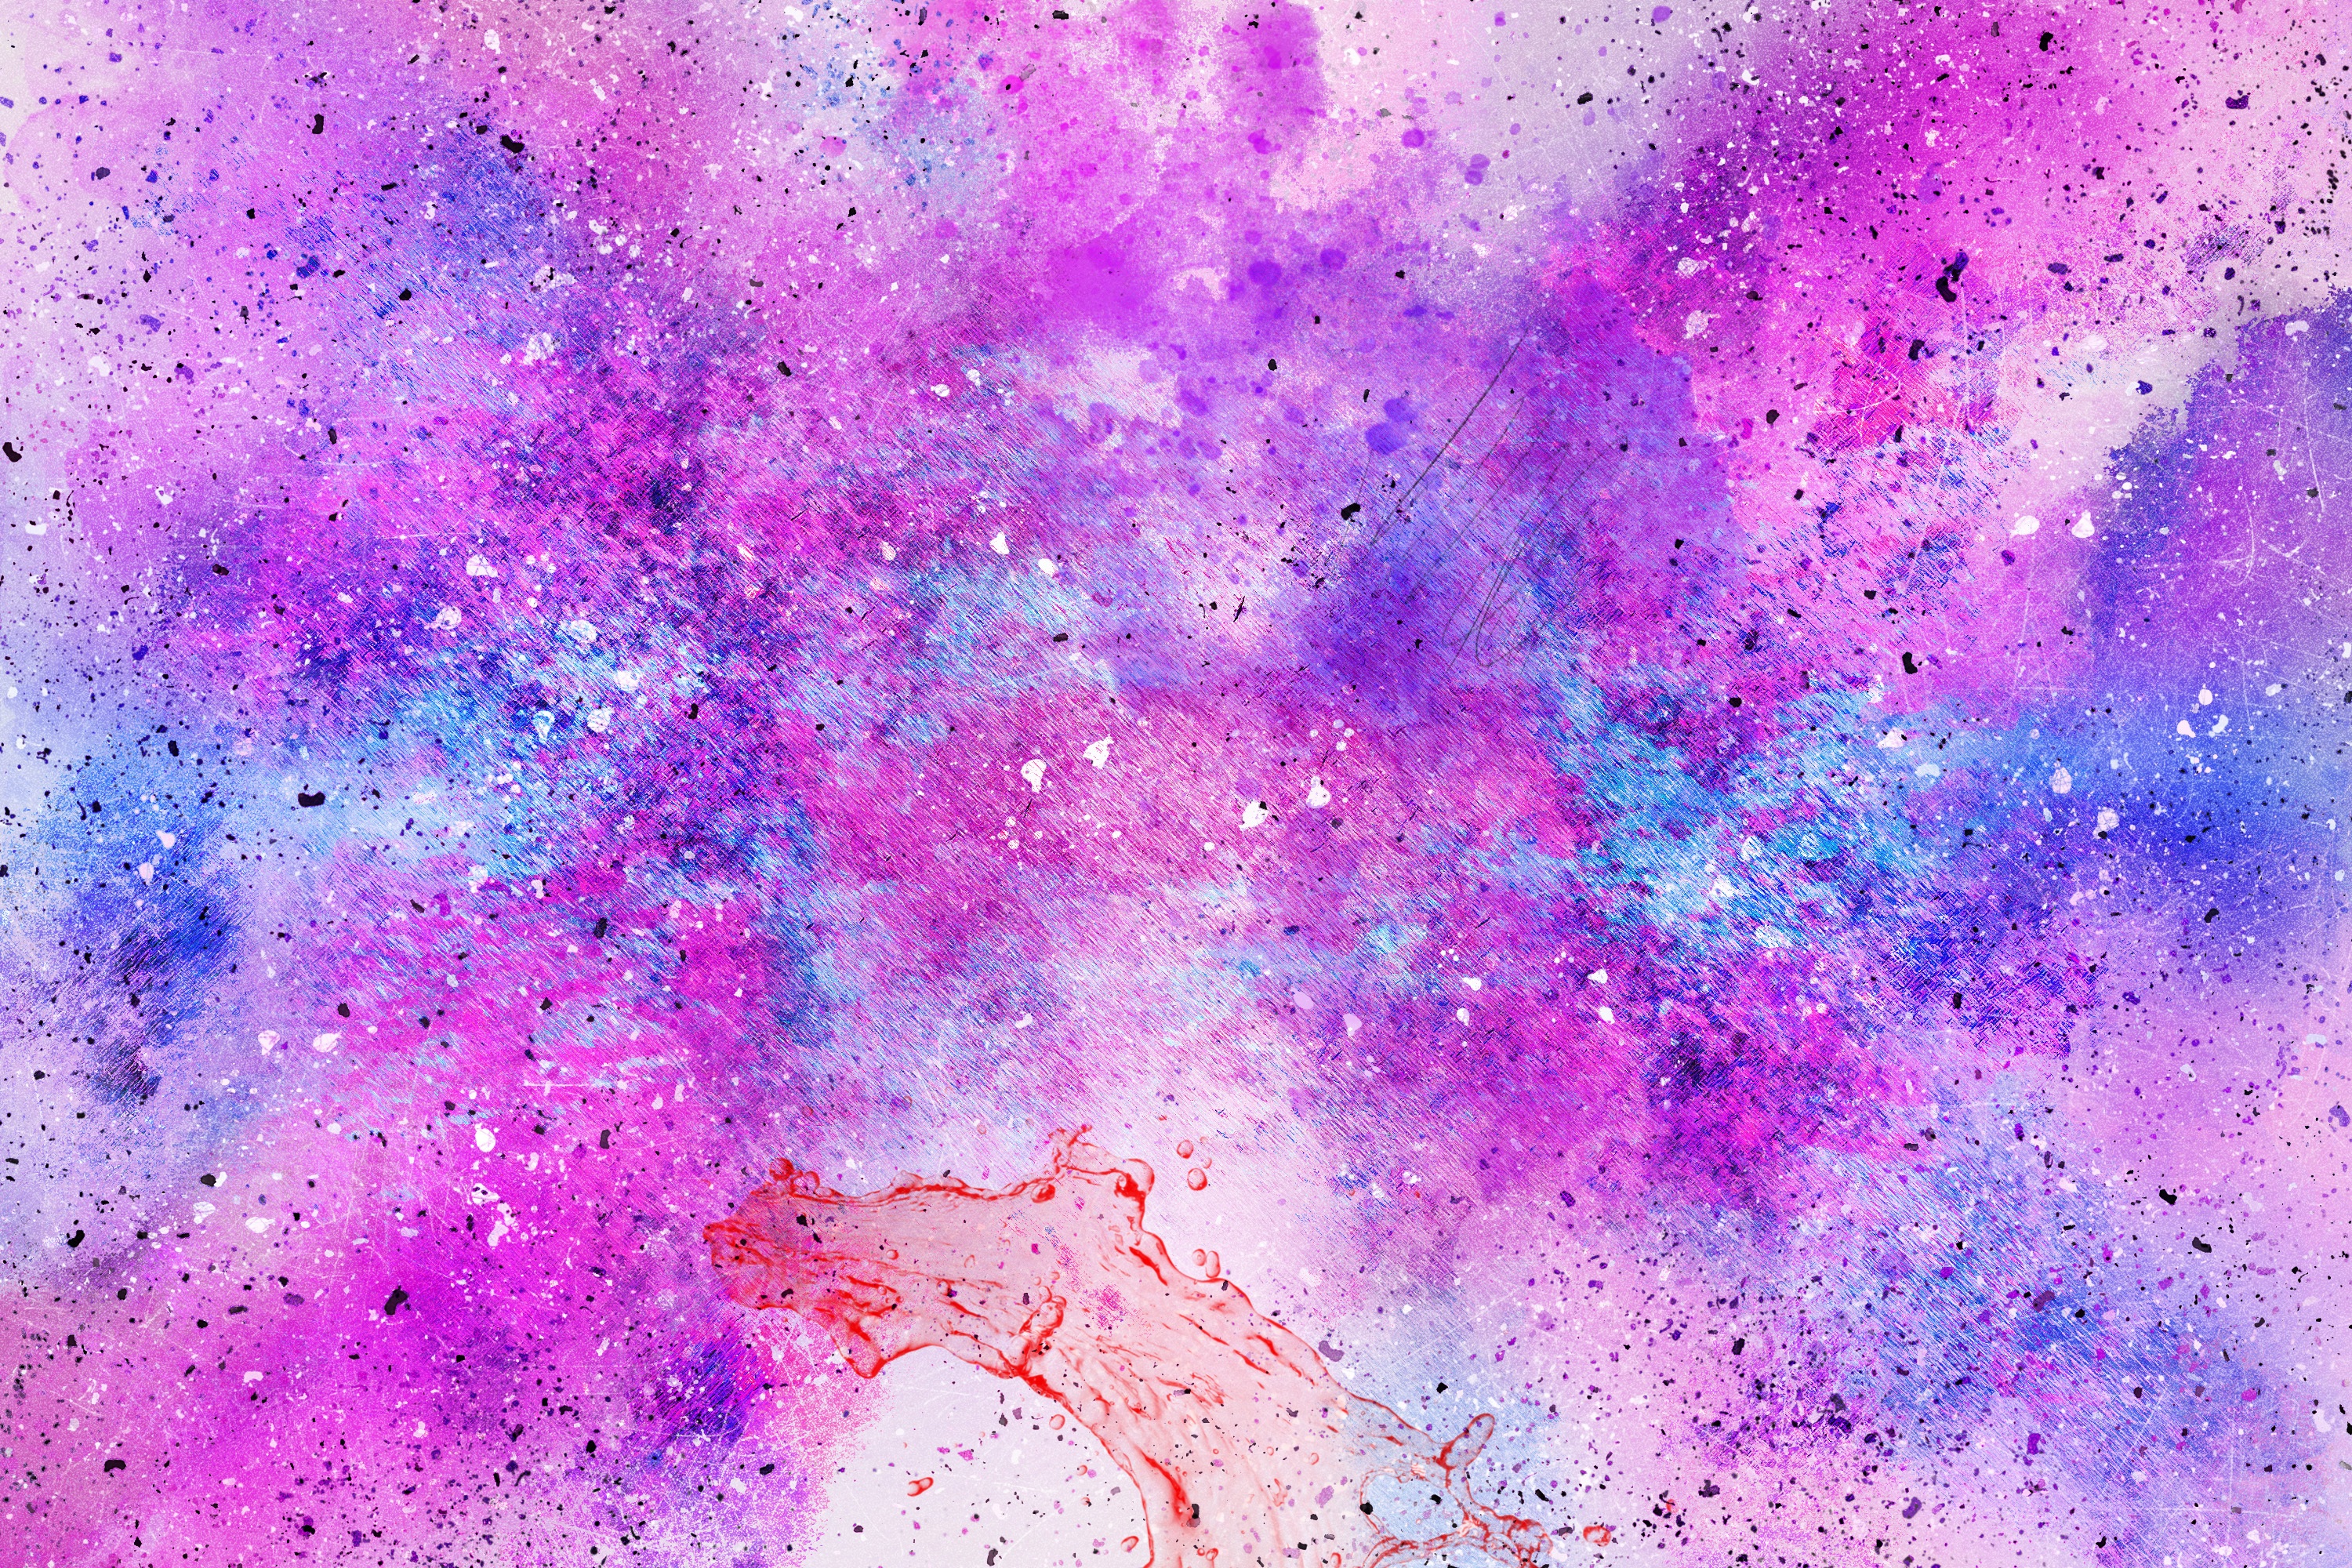 148094 download wallpaper abstract, pink, texture, stains, spots, watercolor screensavers and pictures for free